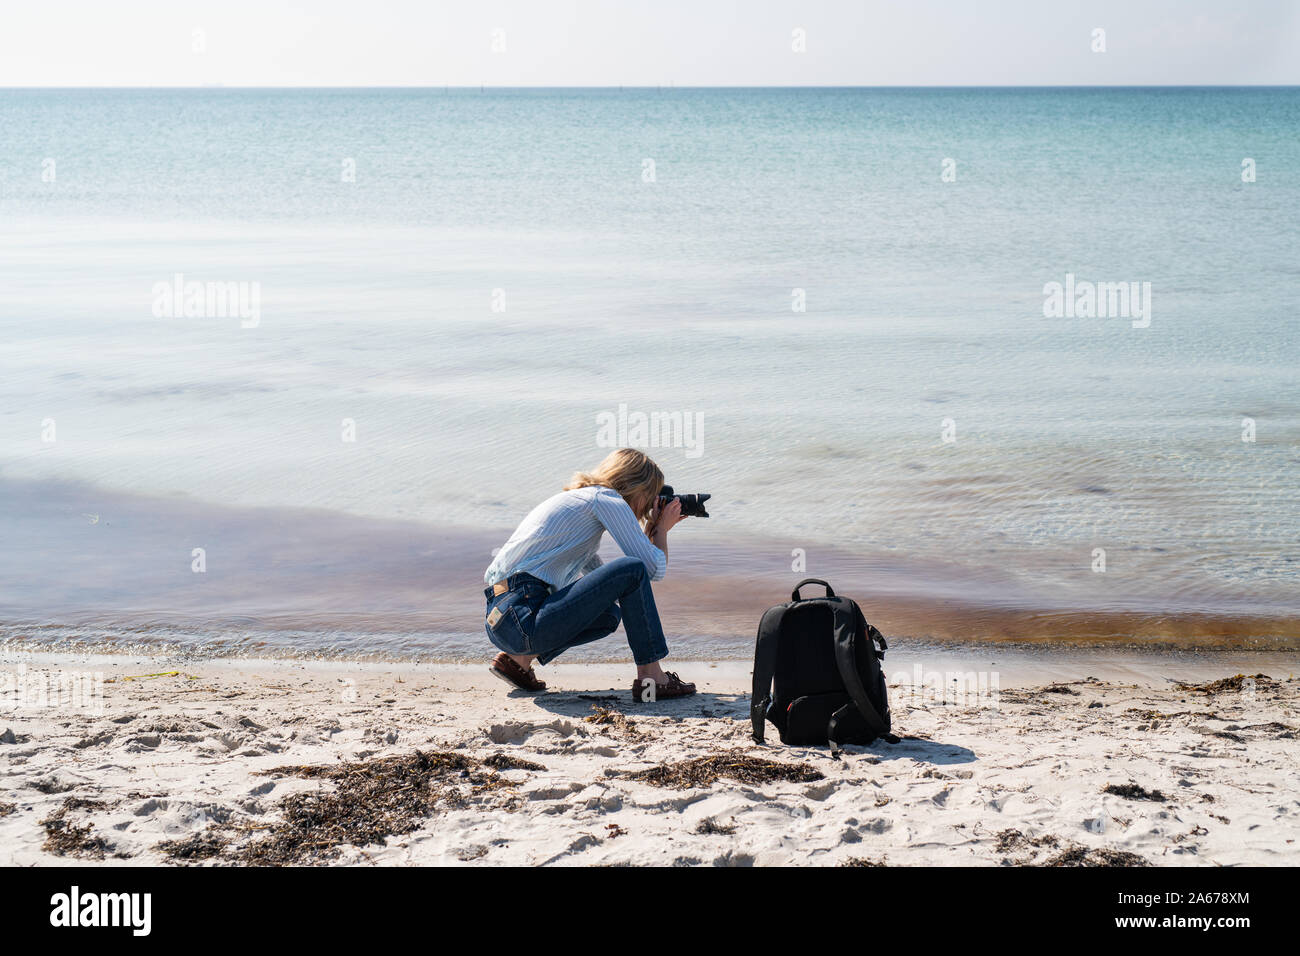 Woman photographing from a beach Stock Photo